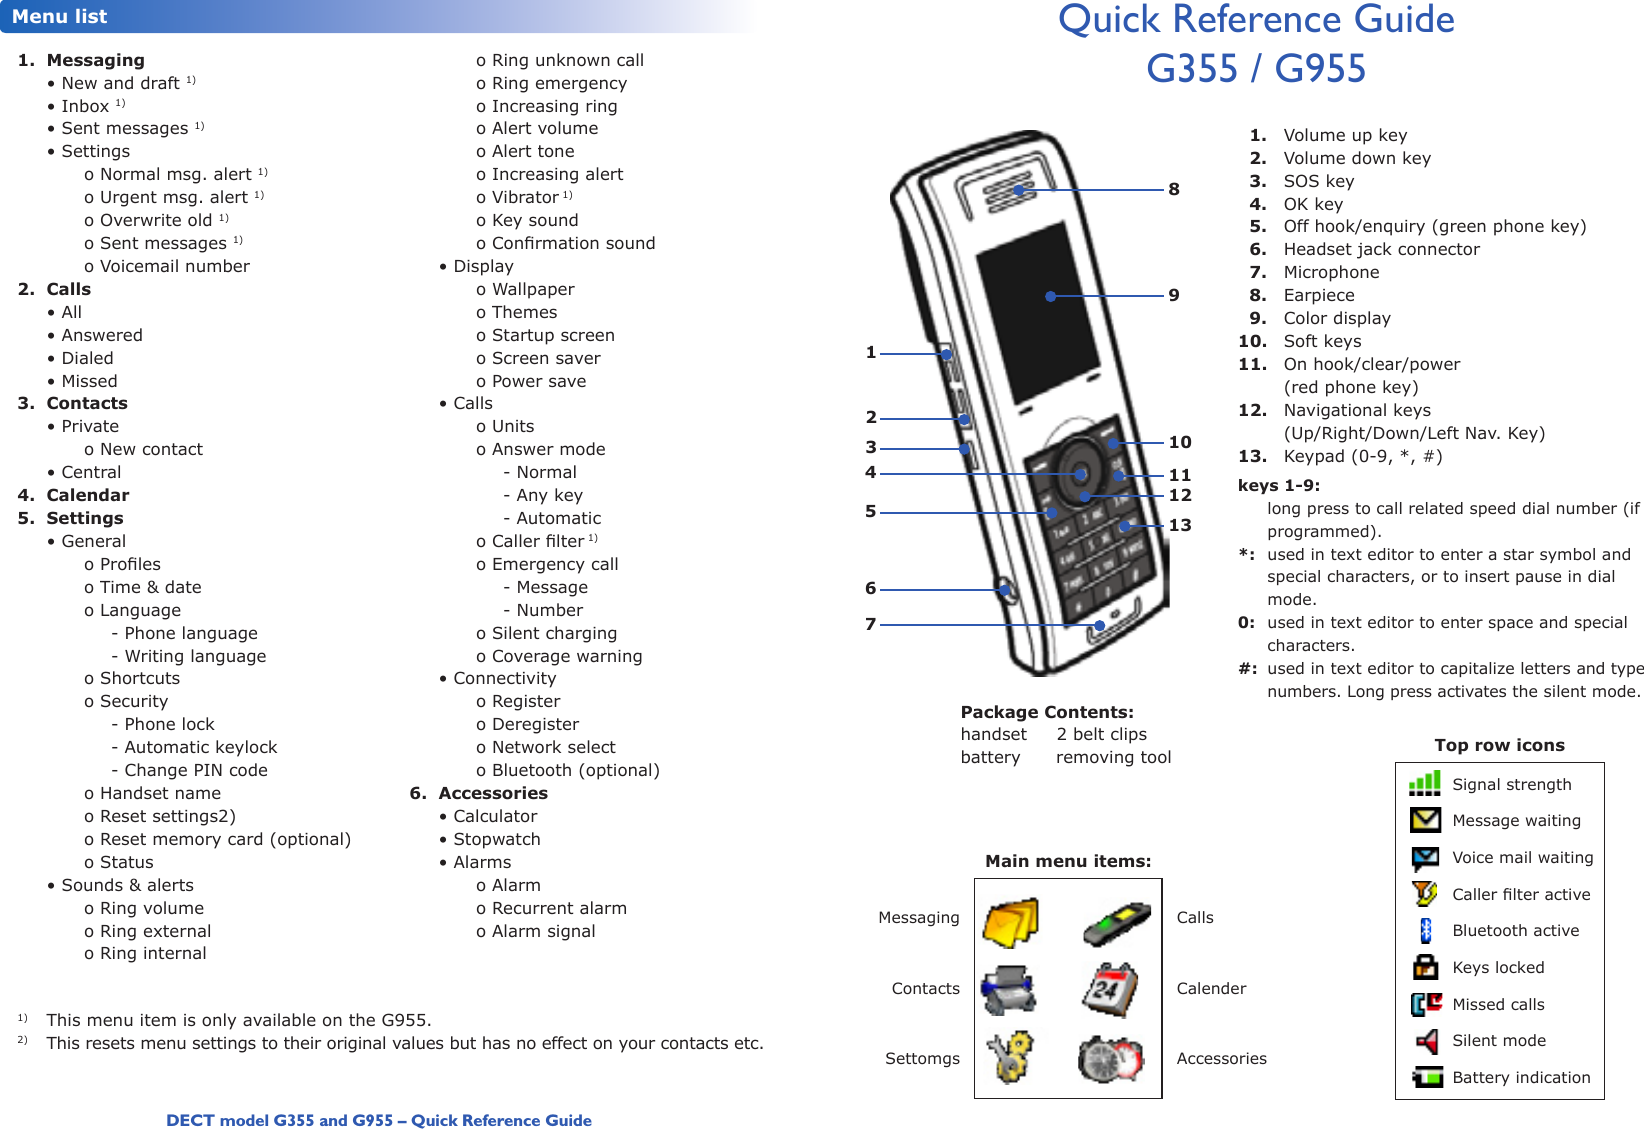 DECT model G355 and G955 – Quick Reference GuideQuick Reference Guide G355 / G955 1.  Volume up key 2.  Volume down key 3.  SOS key 4.  OK key 5.  Off hook/enquiry (green phone key)  6.  Headset jack connector  7.  Microphone  8.  Earpiece 9.  Color display10.  Soft keys11.  On hook/clear/power     (red phone key)12.  Navigational keys     (Up/Right/Down/Left Nav. Key)13.  Keypad (0-9, *, #)keys 1-9:   long press to call related speed dial number (if programmed).*:  used in text editor to enter a star symbol and special characters, or to insert pause in dial mode.0:  used in text editor to enter space and special characters.#:  used in text editor to capitalize letters and type numbers. Long press activates the silent mode. 1.  Messaging  • New and draft 1)  • Inbox 1)  • Sent messages 1)  • Settings    o Normal msg. alert 1)    o Urgent msg. alert 1)    o Overwrite old 1)    o Sent messages 1)    o Voicemail number2.  Calls  • All  • Answered  • Dialed  • Missed3.  Contacts  • Private    o New contact  • Central4.  Calendar5.  Settings  • General  oProles    o Time &amp; date    o Language      - Phone language      - Writing language    o Shortcuts    o Security      - Phone lock      - Automatic keylock      - Change PIN code    o Handset name    o Reset settings2)    o Reset memory card (optional)    o Status  • Sounds &amp; alerts    o Ring volume    o Ring external    o Ring internal    o Ring unknown call    o Ring emergency    o Increasing ring    o Alert volume    o Alert tone    o Increasing alert    o Vibrator 1)    o Key sound  oConrmationsound  • Display    o Wallpaper    o Themes    o Startup screen    o Screen saver    o Power save  • Calls    o Units    o Answer mode      - Normal      - Any key      - Automatic  oCallerlter 1)    o Emergency call      - Message      - Number    o Silent charging    o Coverage warning  • Connectivity    o Register    o Deregister    o Network select    o Bluetooth (optional)6.  Accessories  • Calculator  • Stopwatch  • Alarms    o Alarm    o Recurrent alarm    o Alarm signalMenu list1)  This menu item is only available on the G955.2)  This resets menu settings to their original values but has no effect on your contacts etc.Package Contents:handset     2 belt clipsbattery      removing toolMain menu items:MessagingContactsSettomgsCallsCalenderAccessoriesTop row iconsSignal strengthMessage waitingVoice mail waitingCallerlteractiveBluetooth activeKeys lockedMissed callsSilent modeBattery indication         89101112131234567